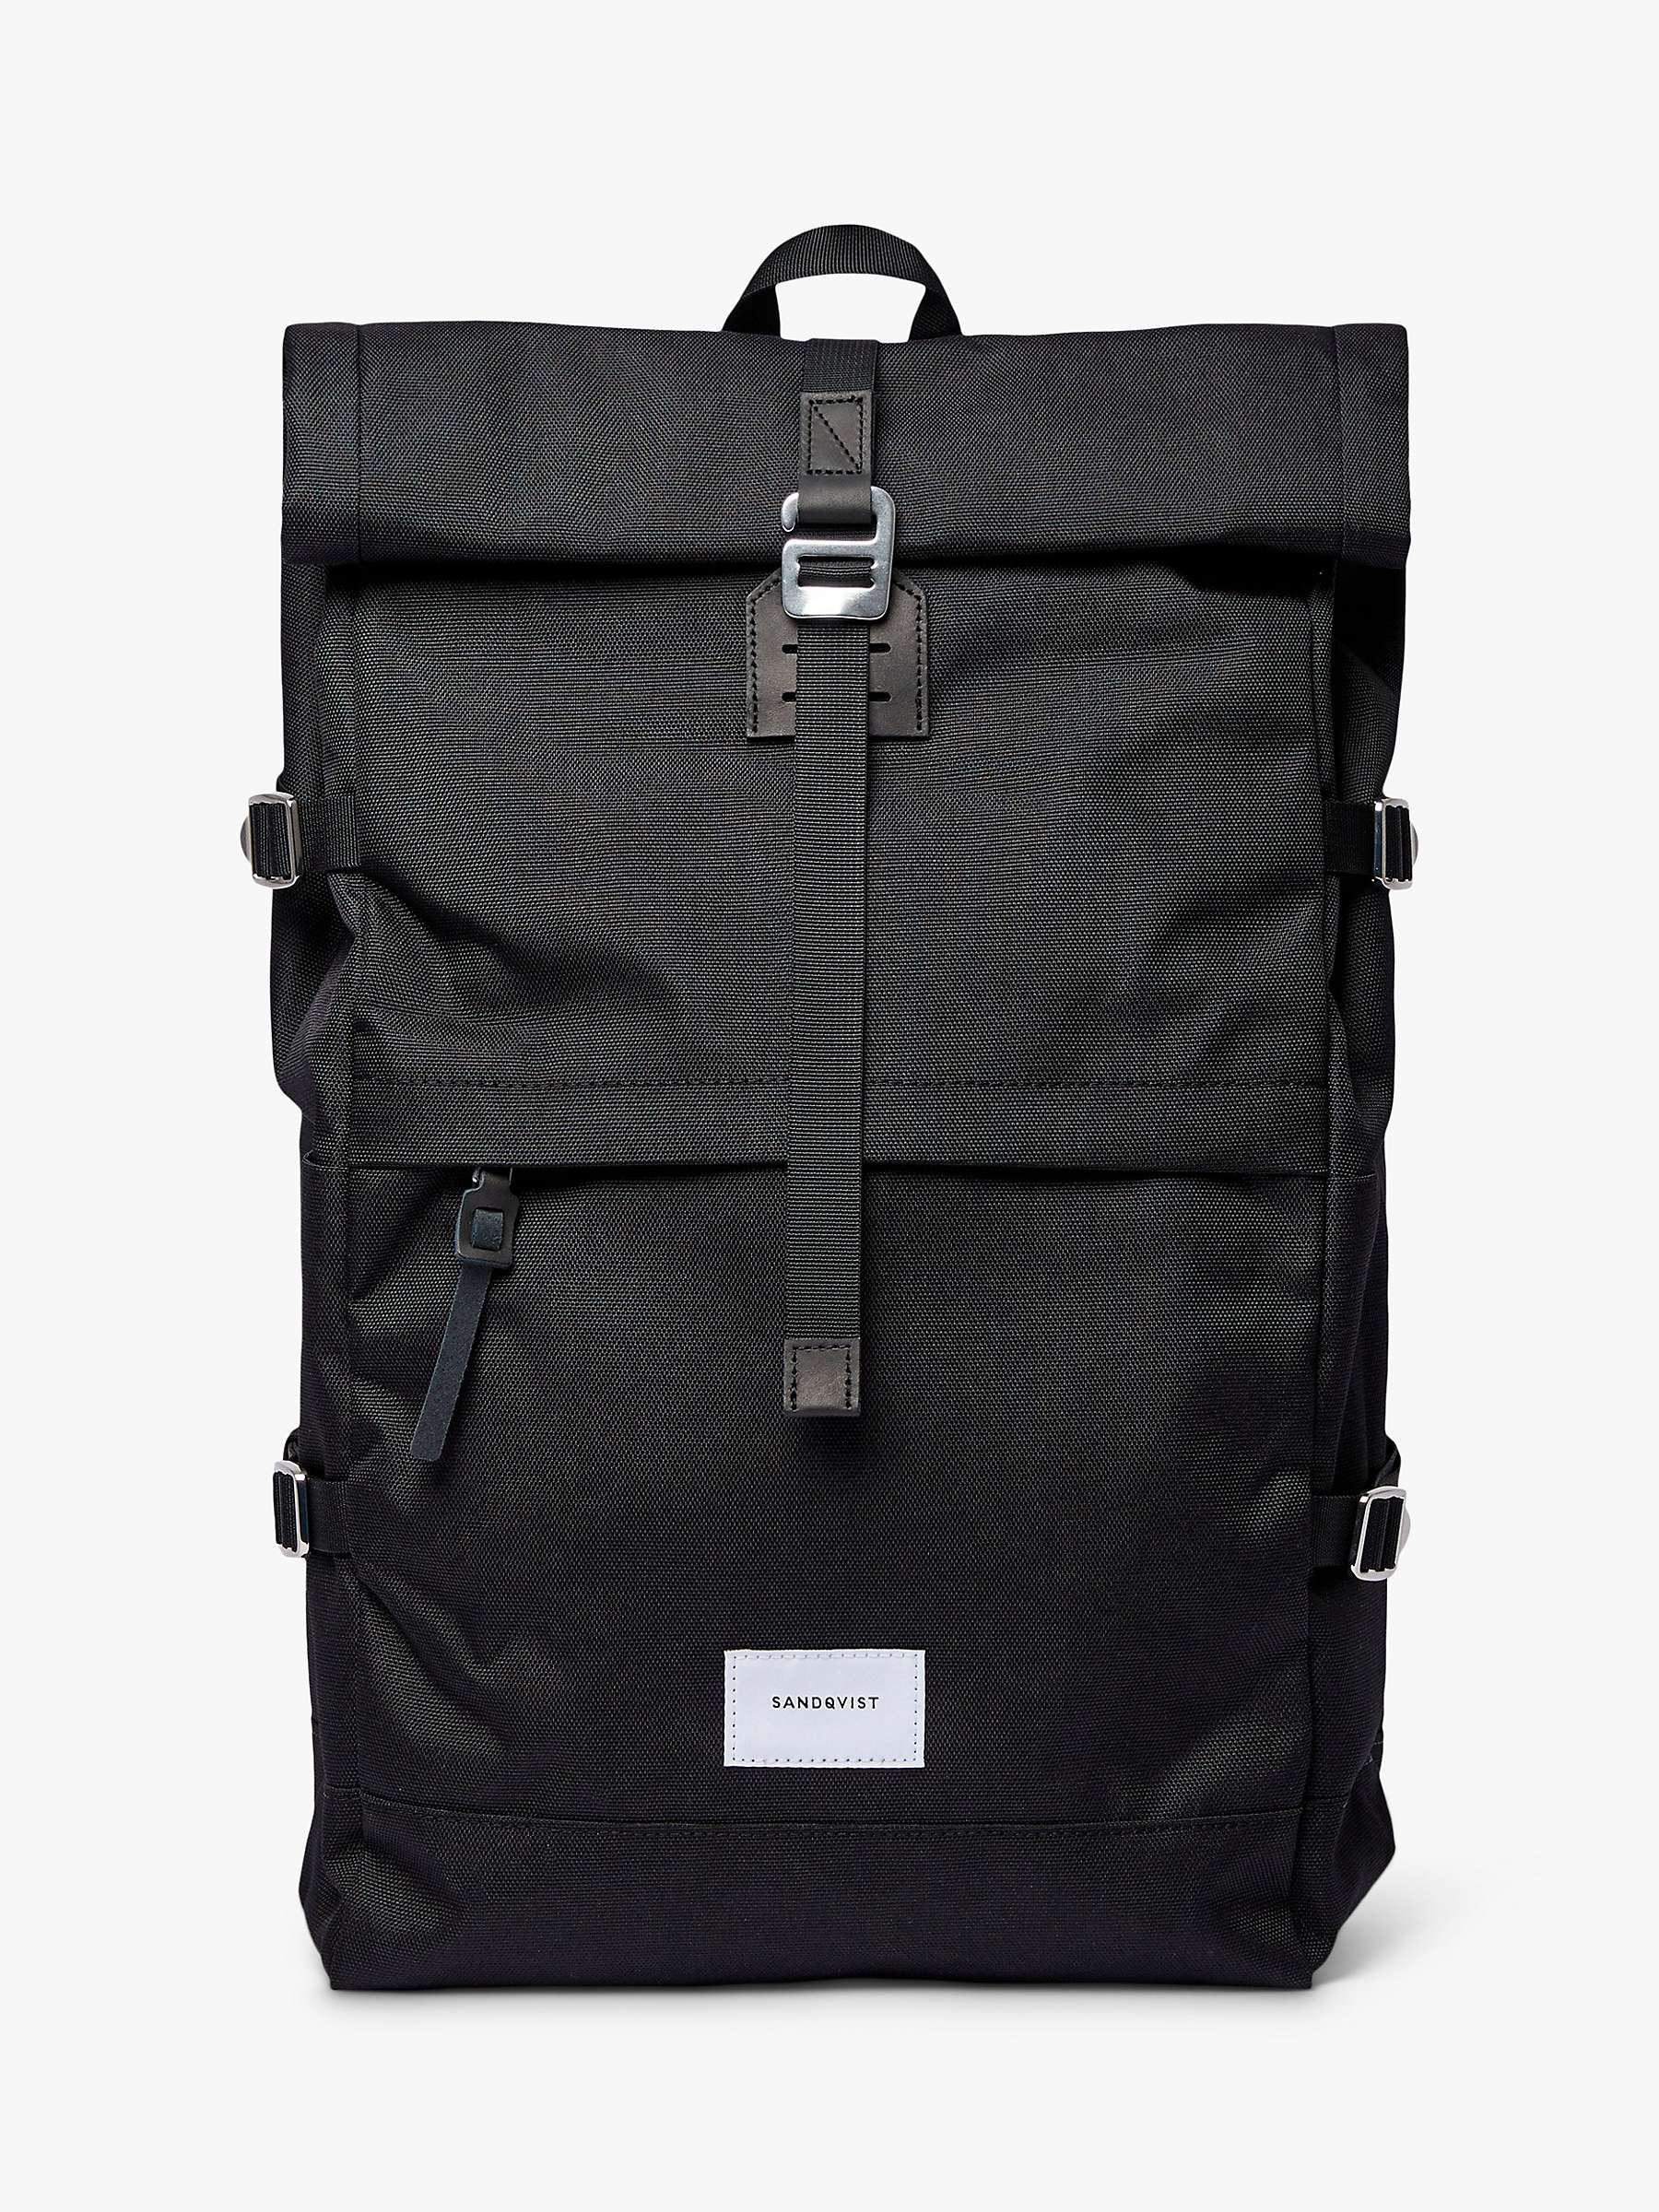 Buy Sandqvist Bernt Recycled Roll-Top Backpack, 20L Online at johnlewis.com